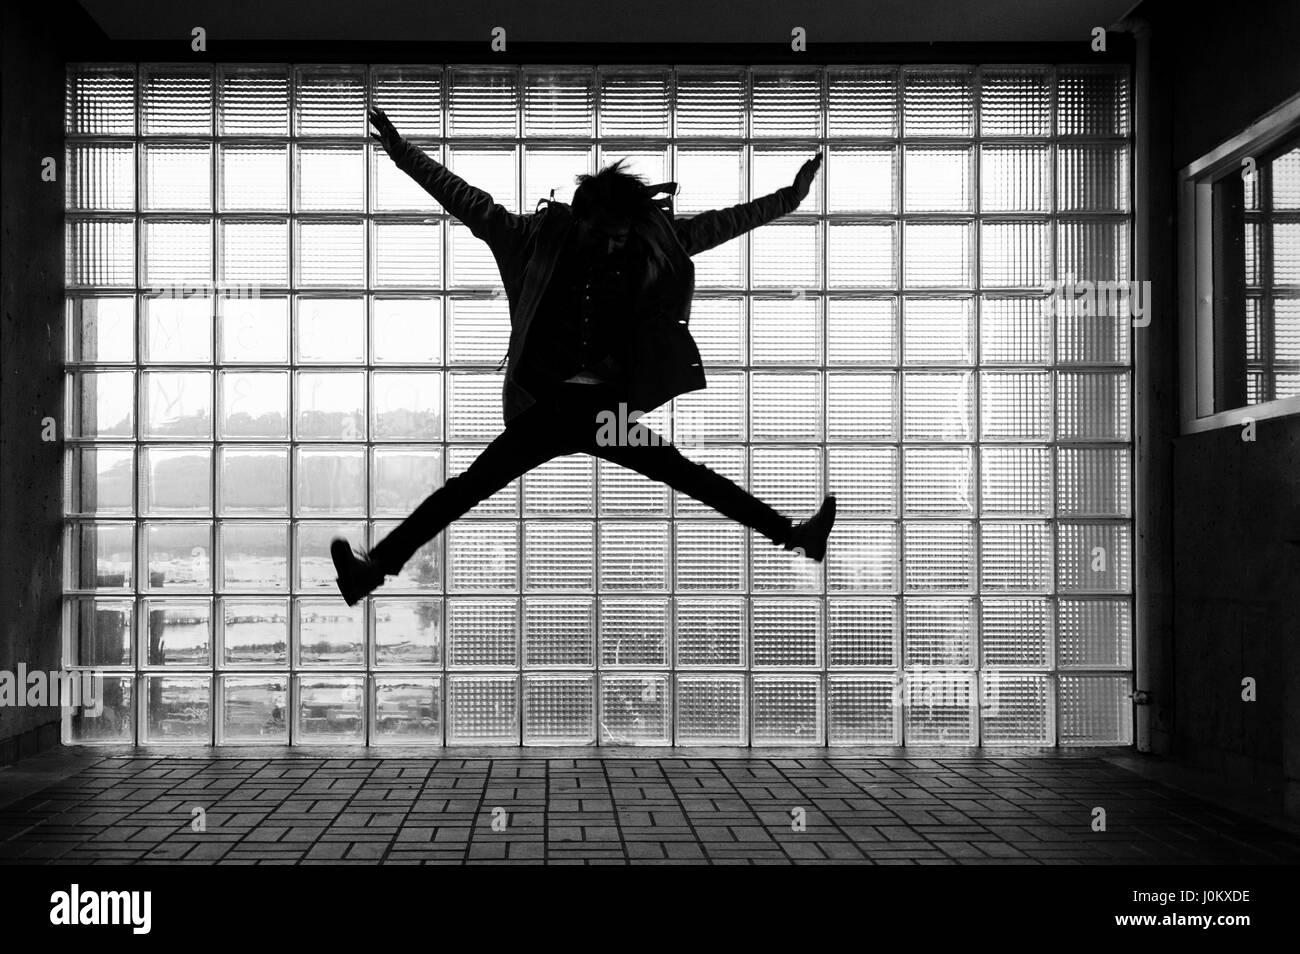 A sihouetted man jumping in from of glass brick, with reflections and movement. Stock Photo